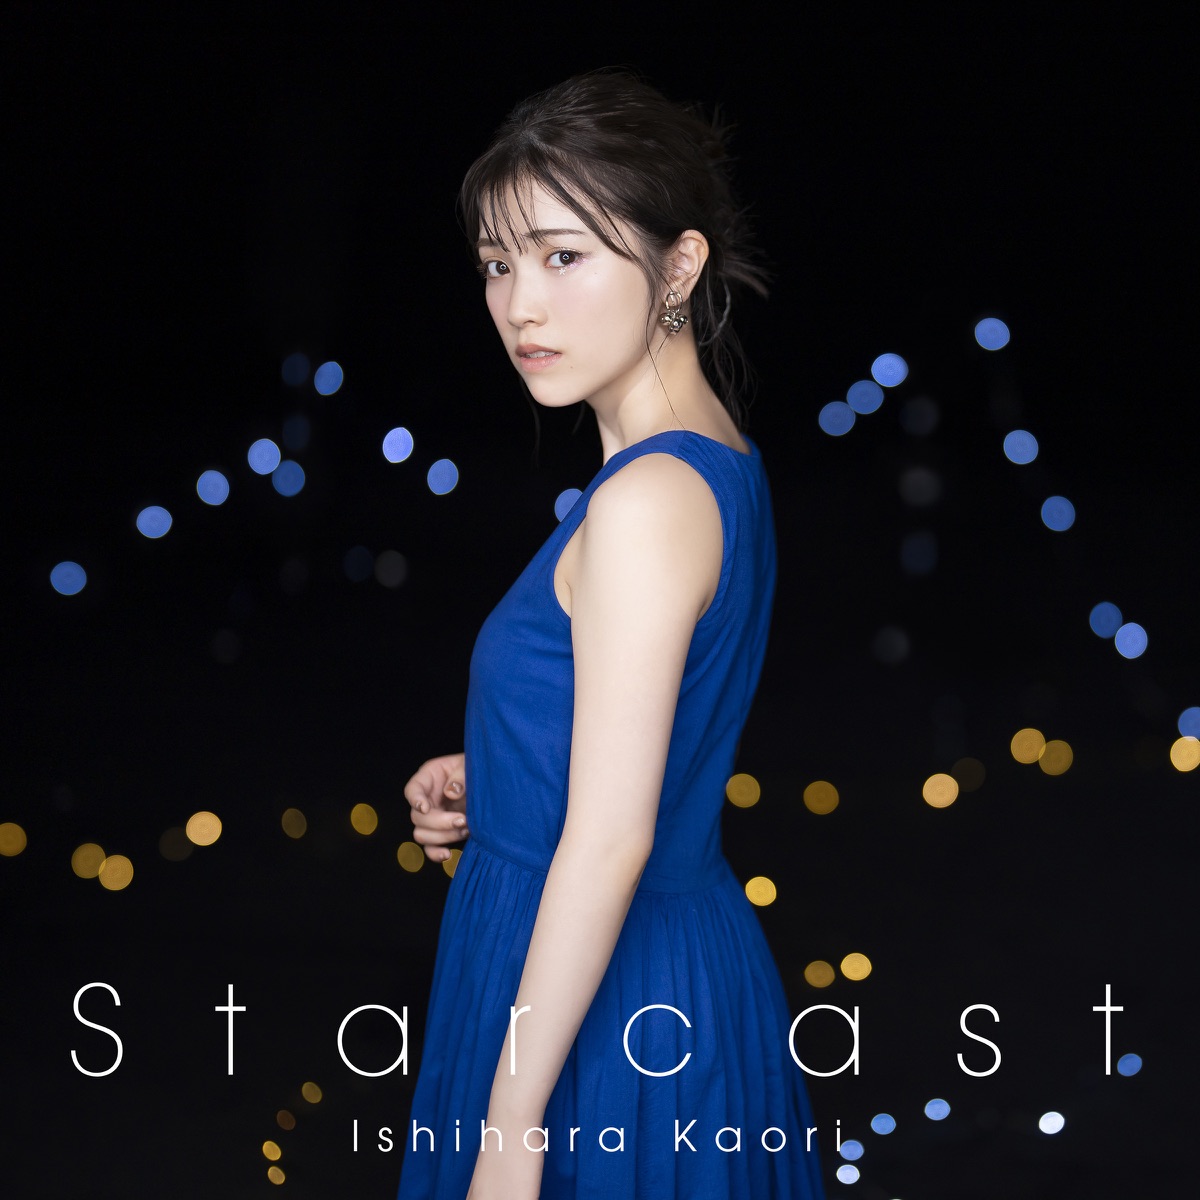 Cover art for『Kaori Ishihara - わざと触れた。』from the release『Starcast